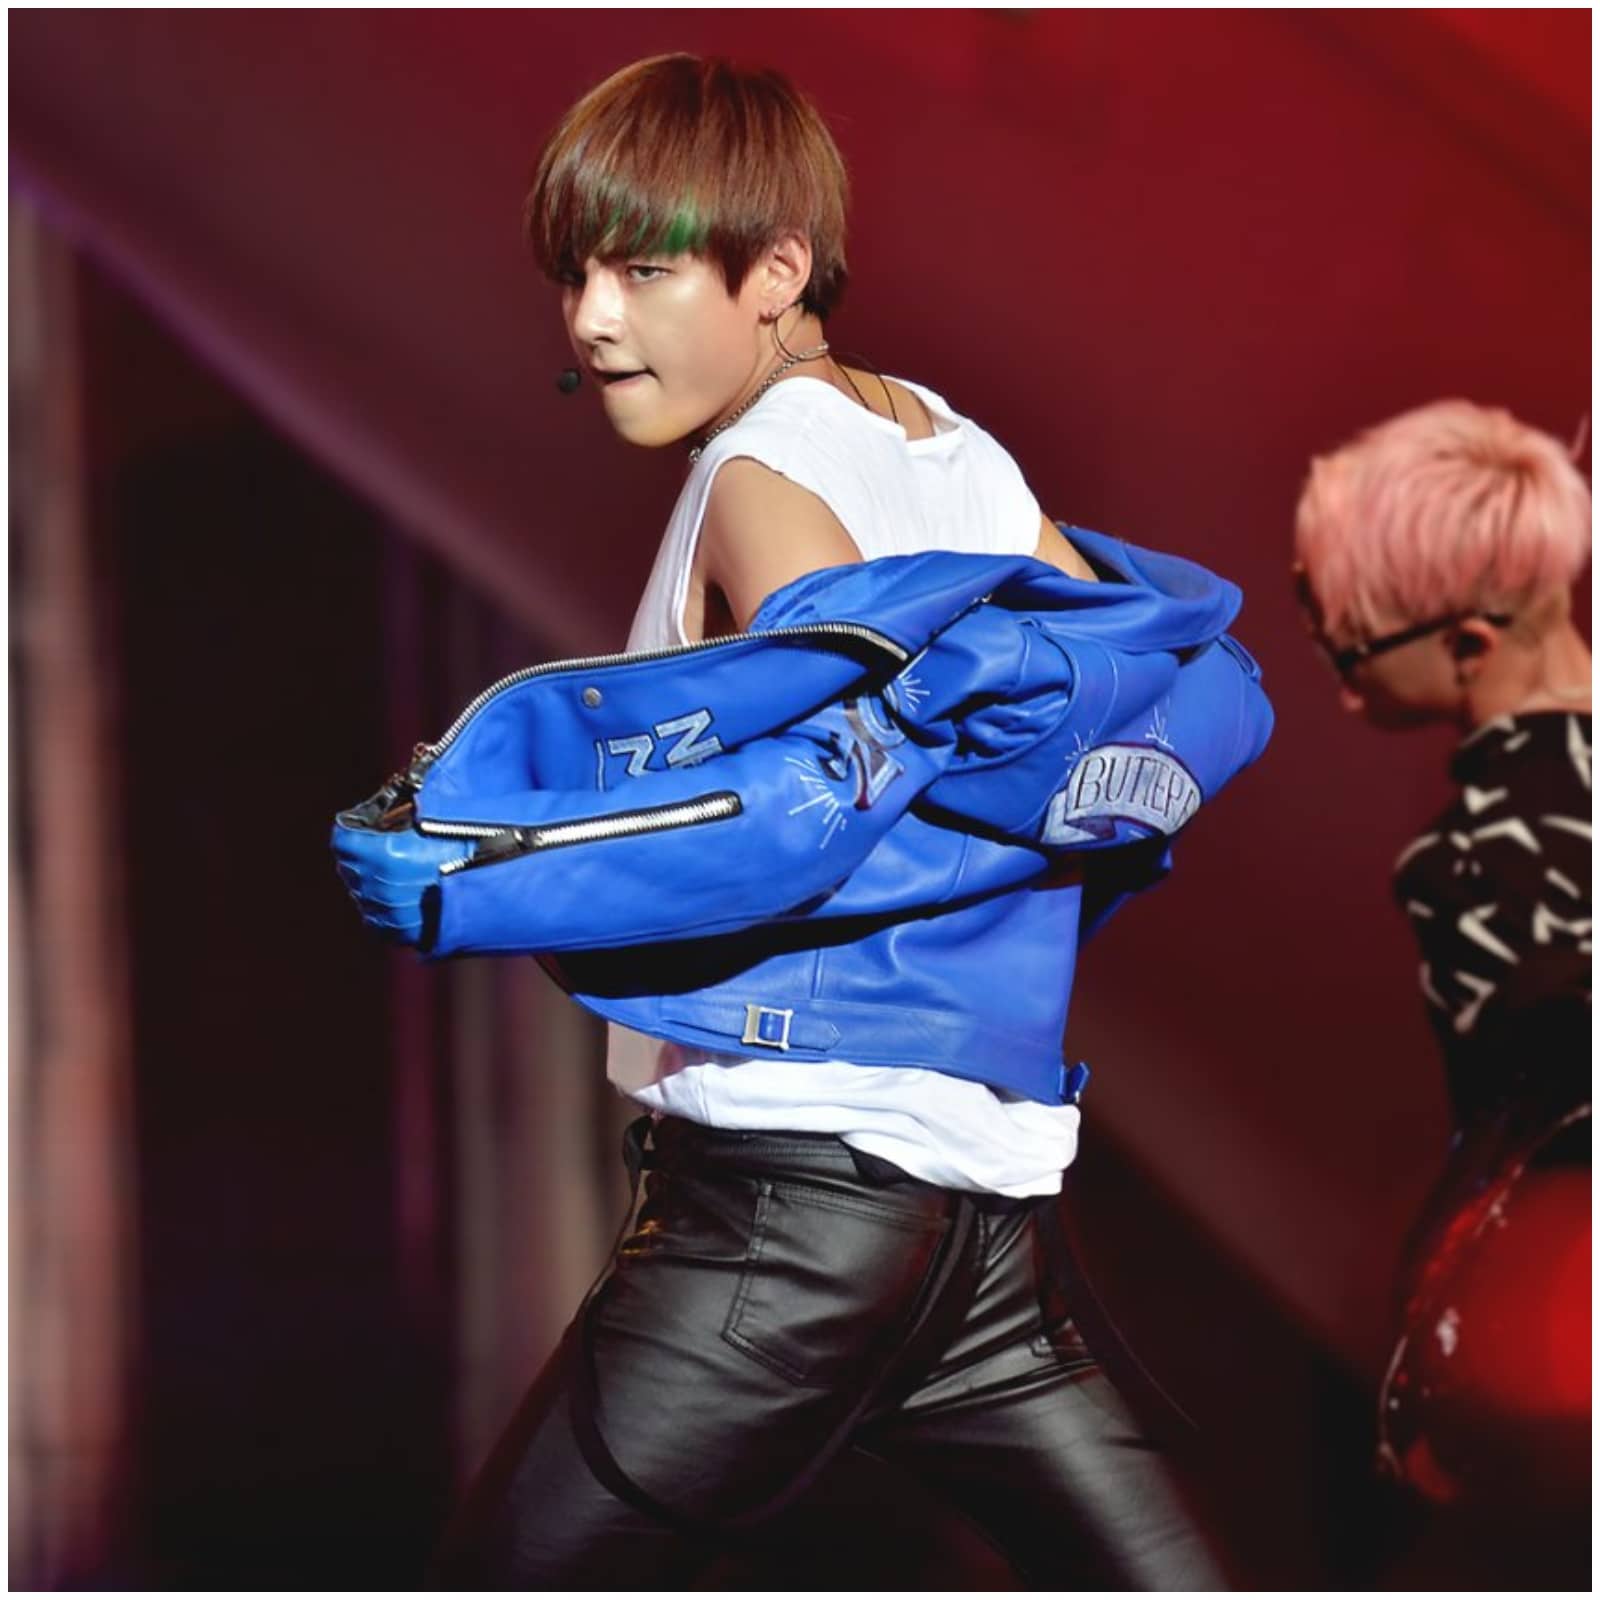 BTS Member Kim Taehyung's Fashion Evolution Since Debut Days, in